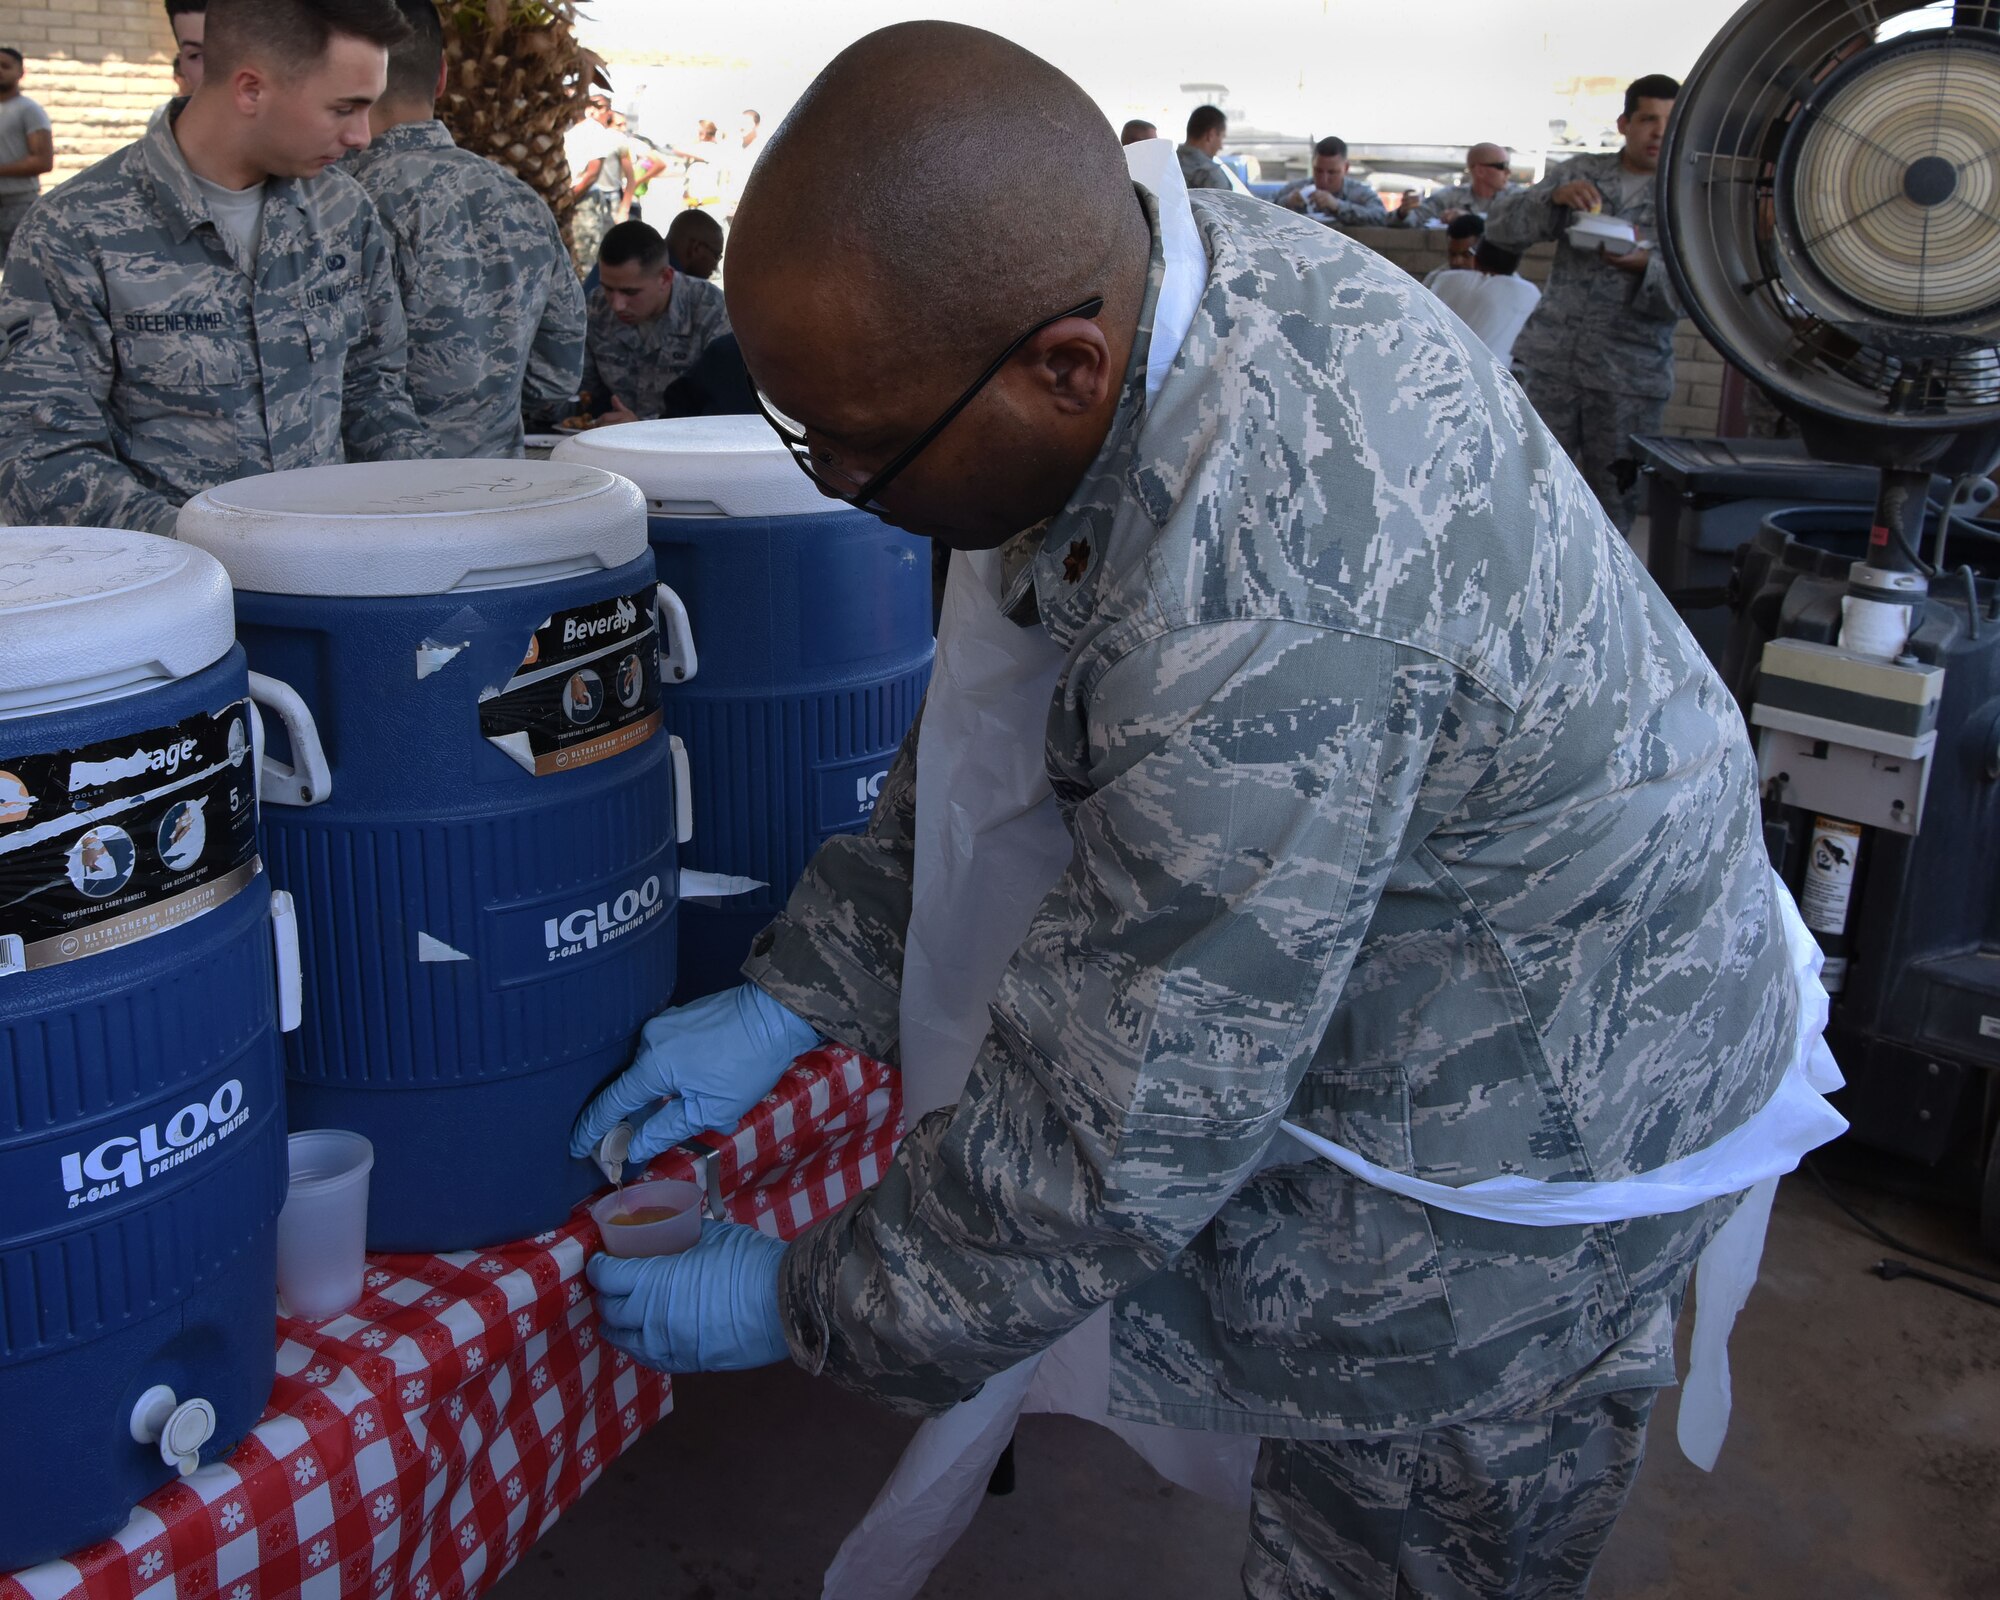 Maj. Andre Mooney, 944th Fighter Wing Individual Mobilization Augmentee chaplain, serves beverages to Airmen during the Flightline Feast Sept. 6, 2018, at Luke Air Force Base, Ariz.